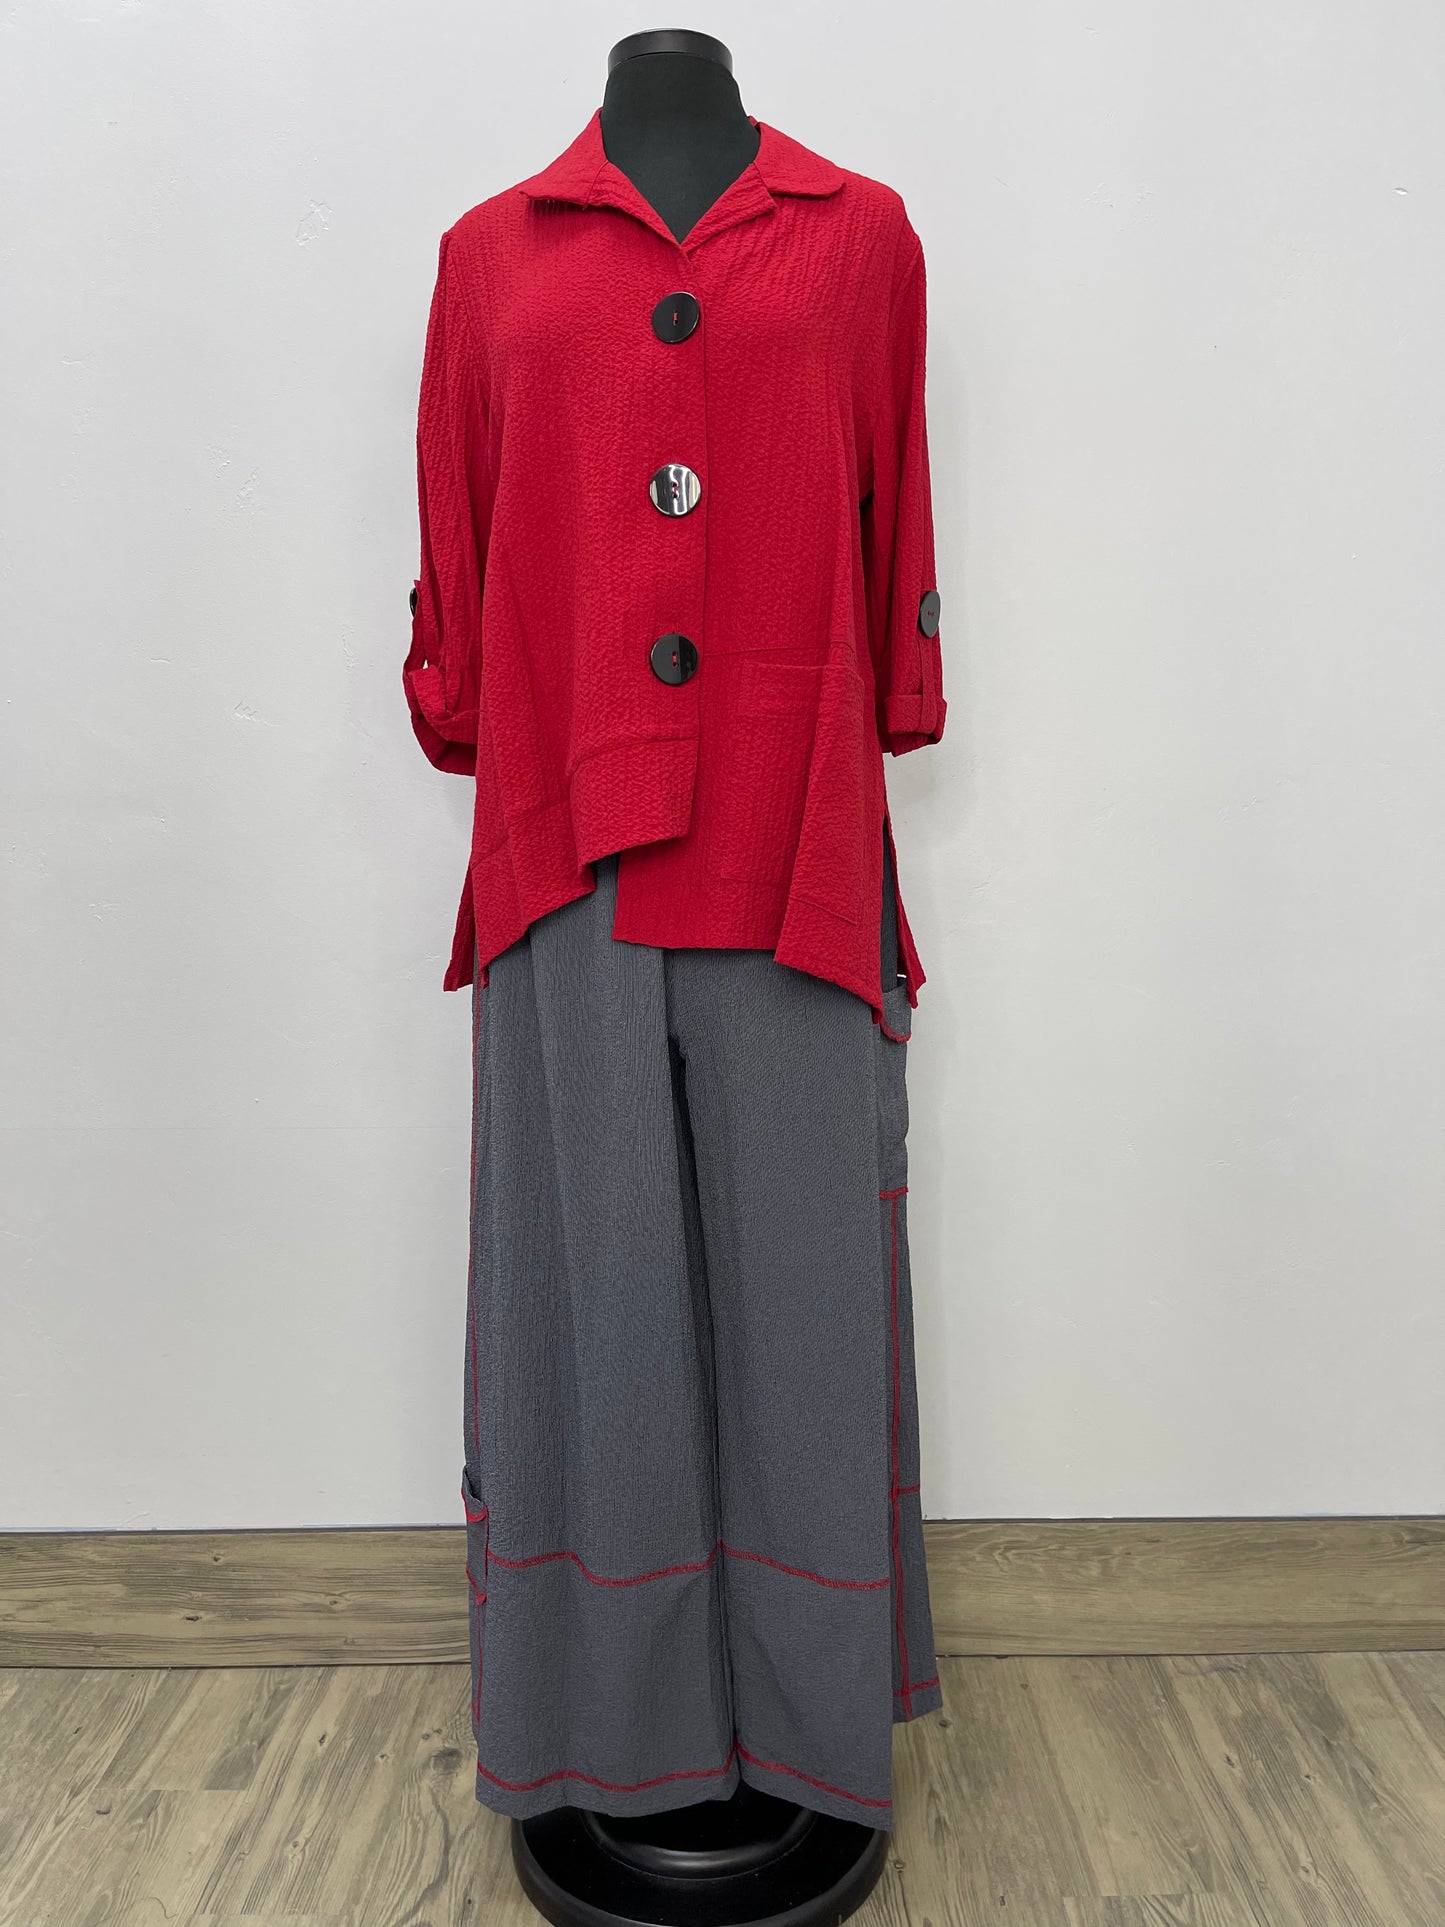 Gray Pants with Black & Red Trim